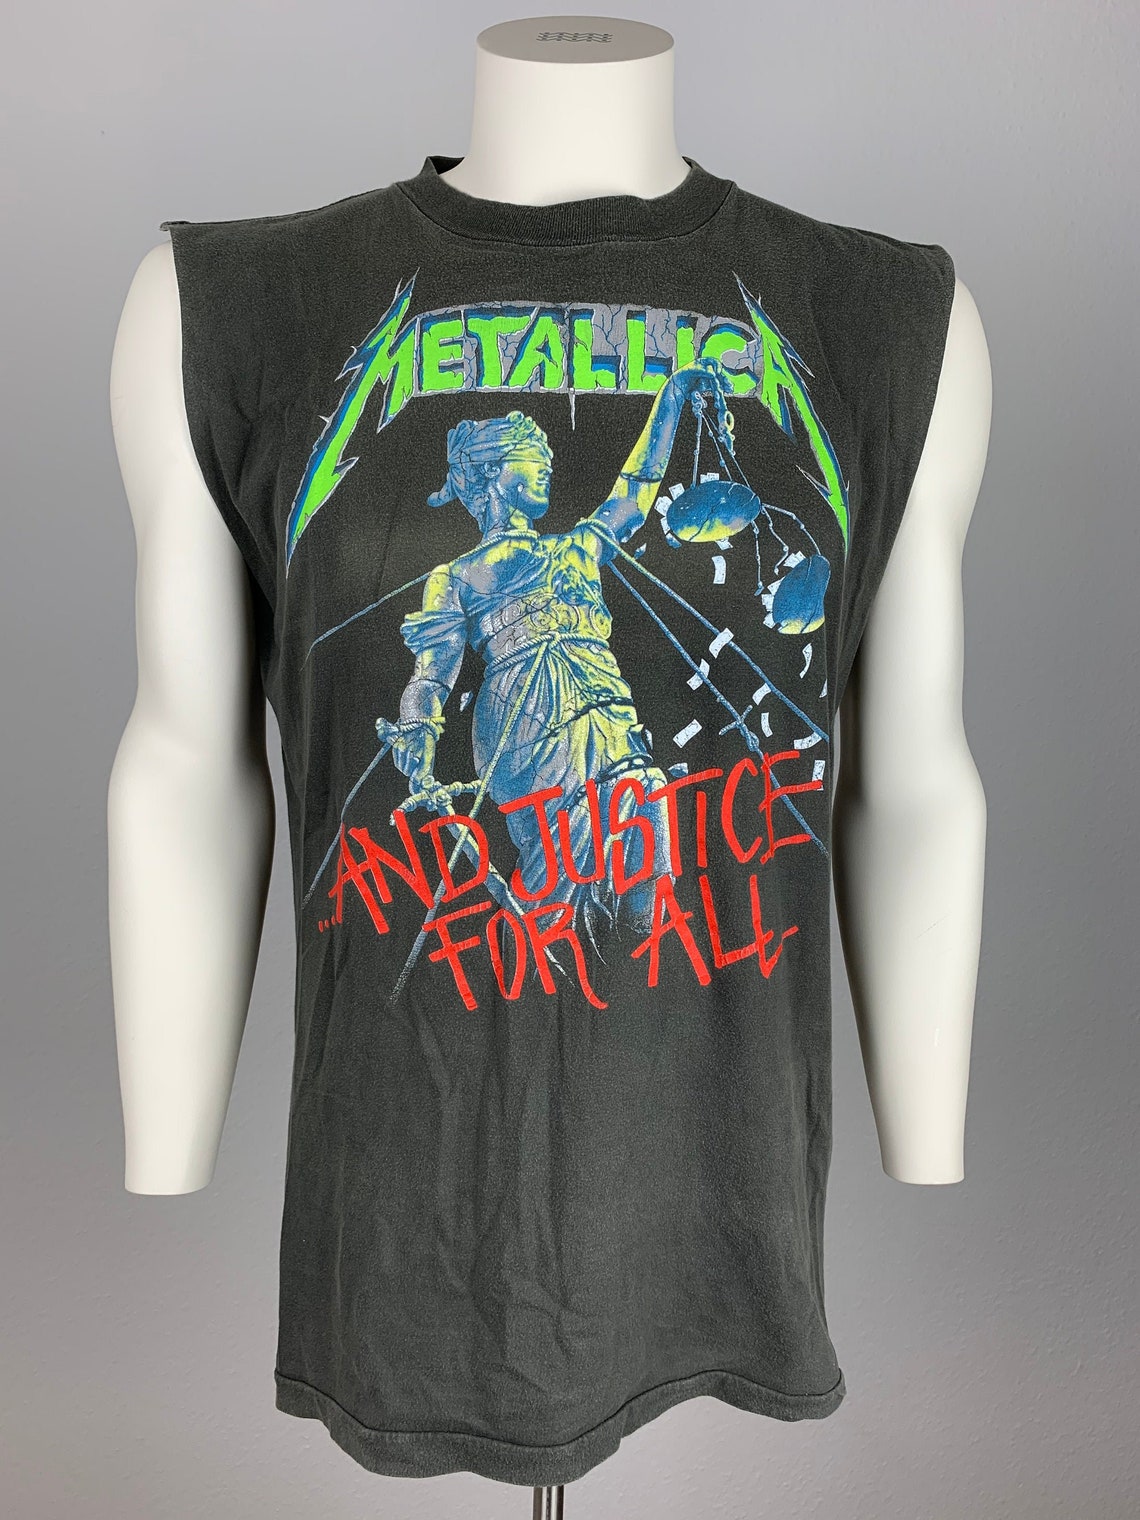 METALLICA 1988 Sleeveless T-shirt Vintage / Justice for All / - Etsy